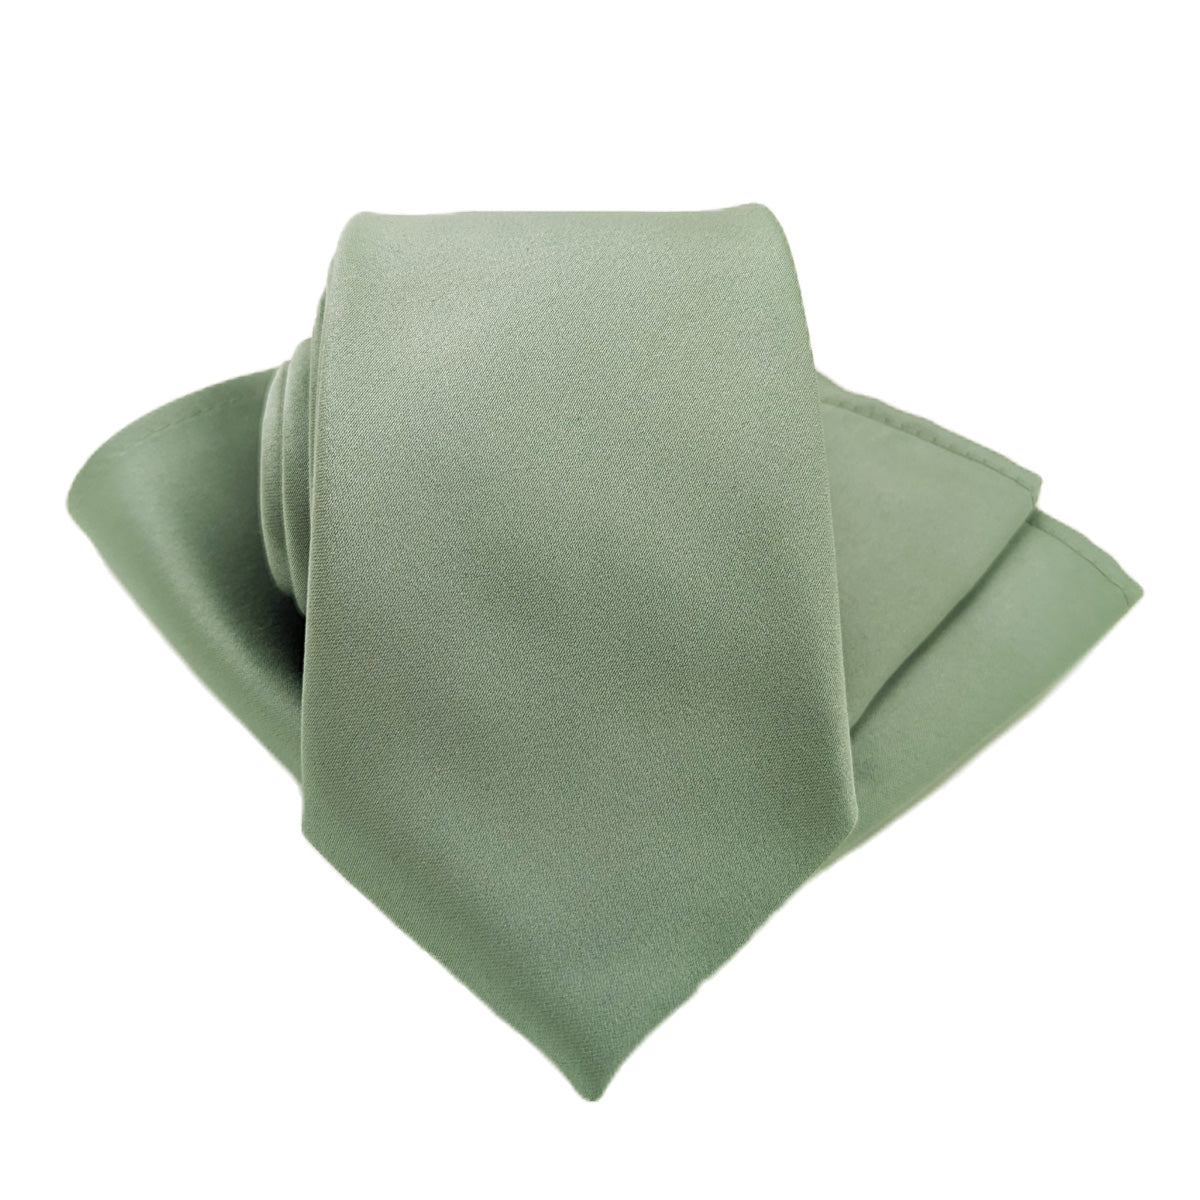 Sage Boys Ties - Childrenswear - Elastic - Swagger & Swoon